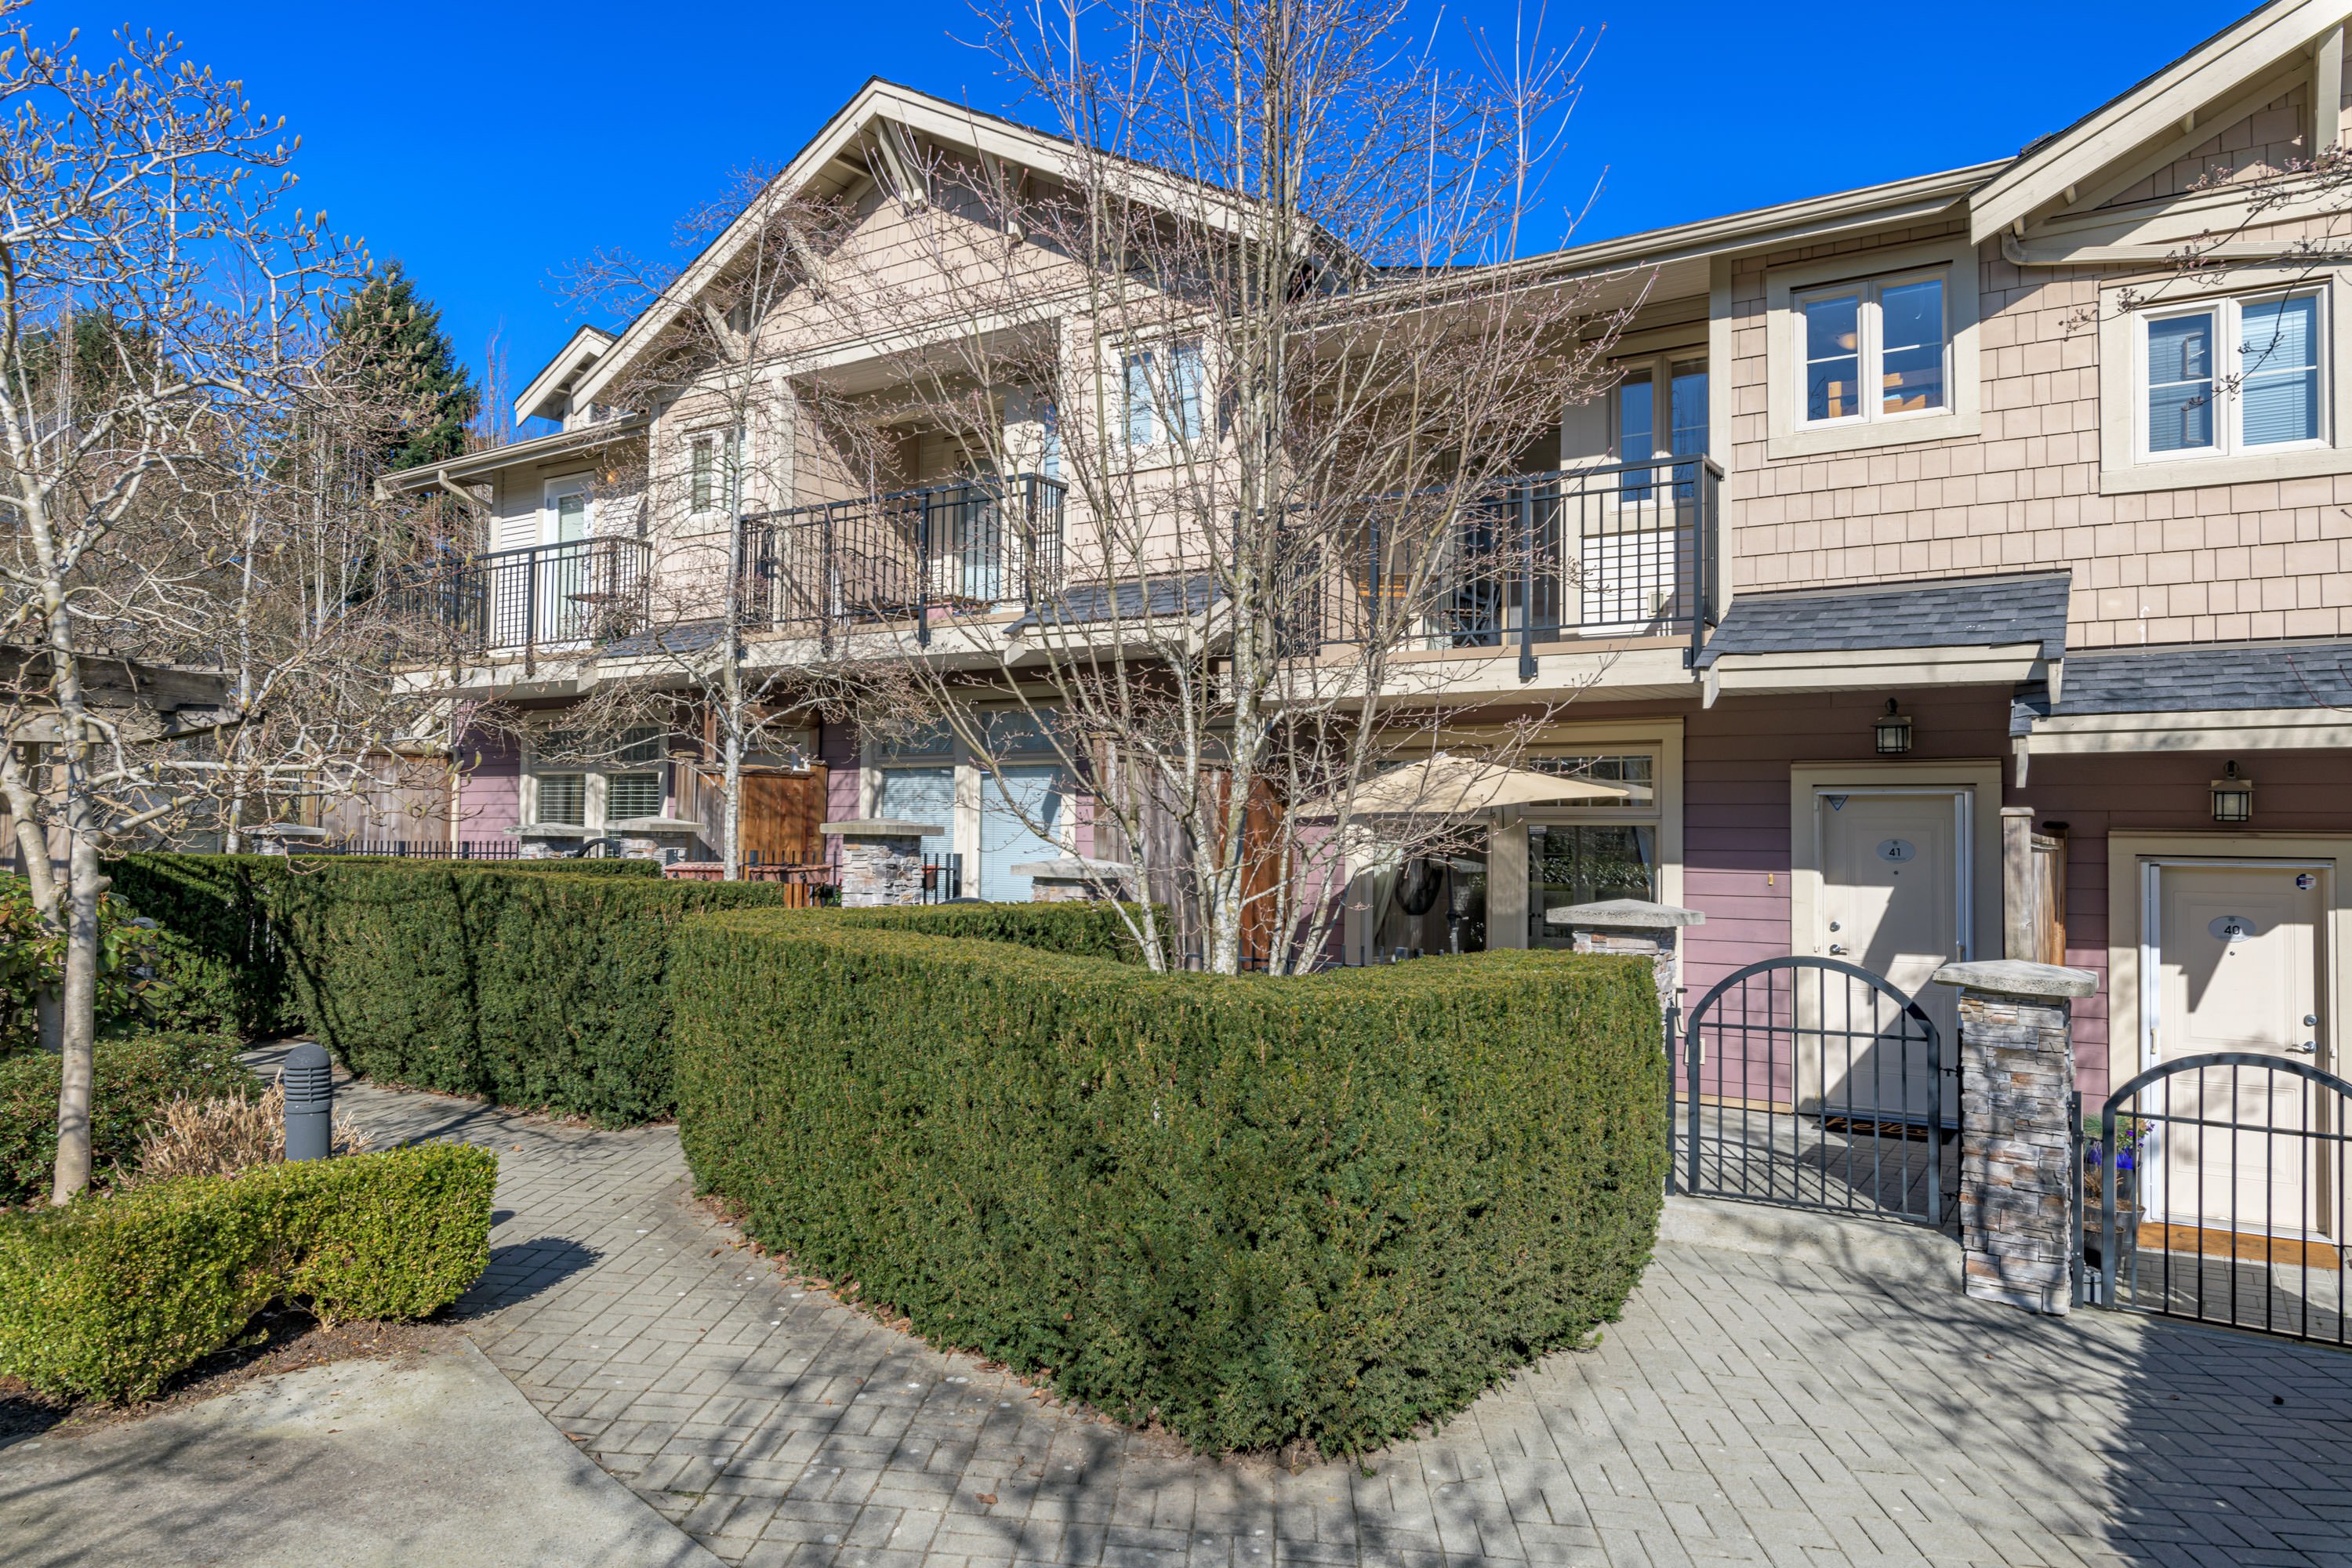 41 - 245 Francis Way, New Westminster